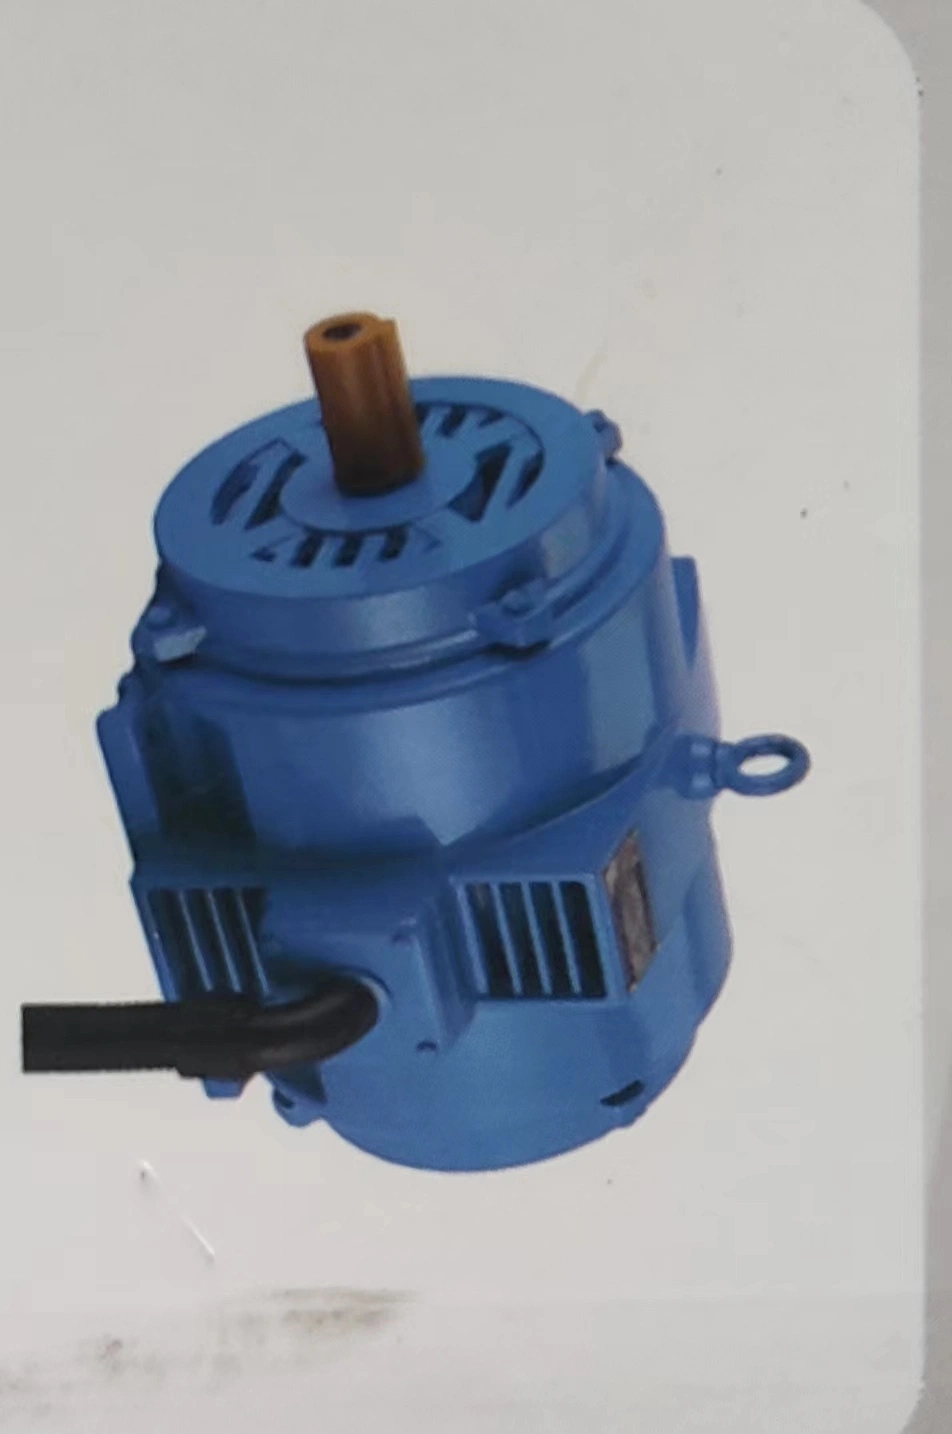 0.12kw-355kw Three Phase Asynchronous Electric Motor AC Motor Induction Motor for Water Pump